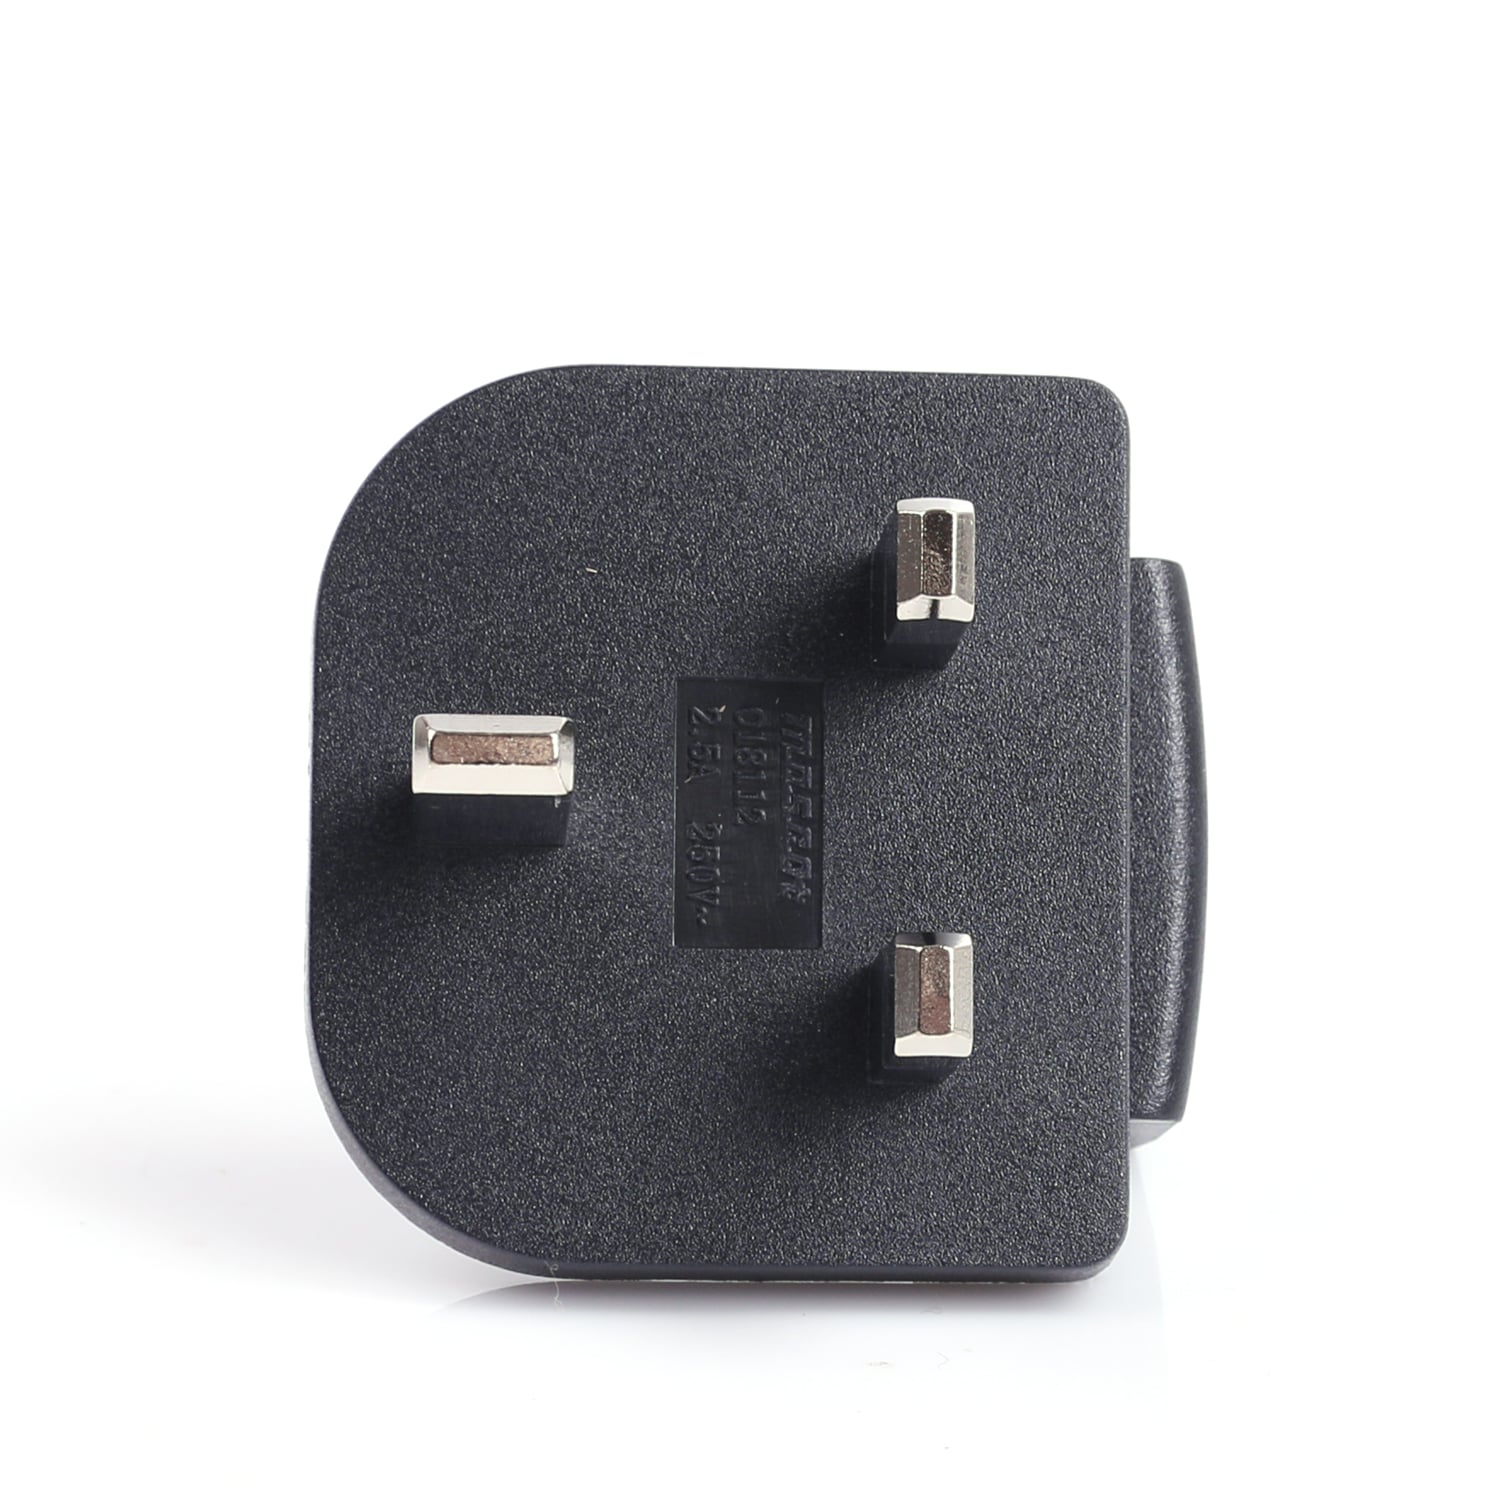 Charger adapter UK